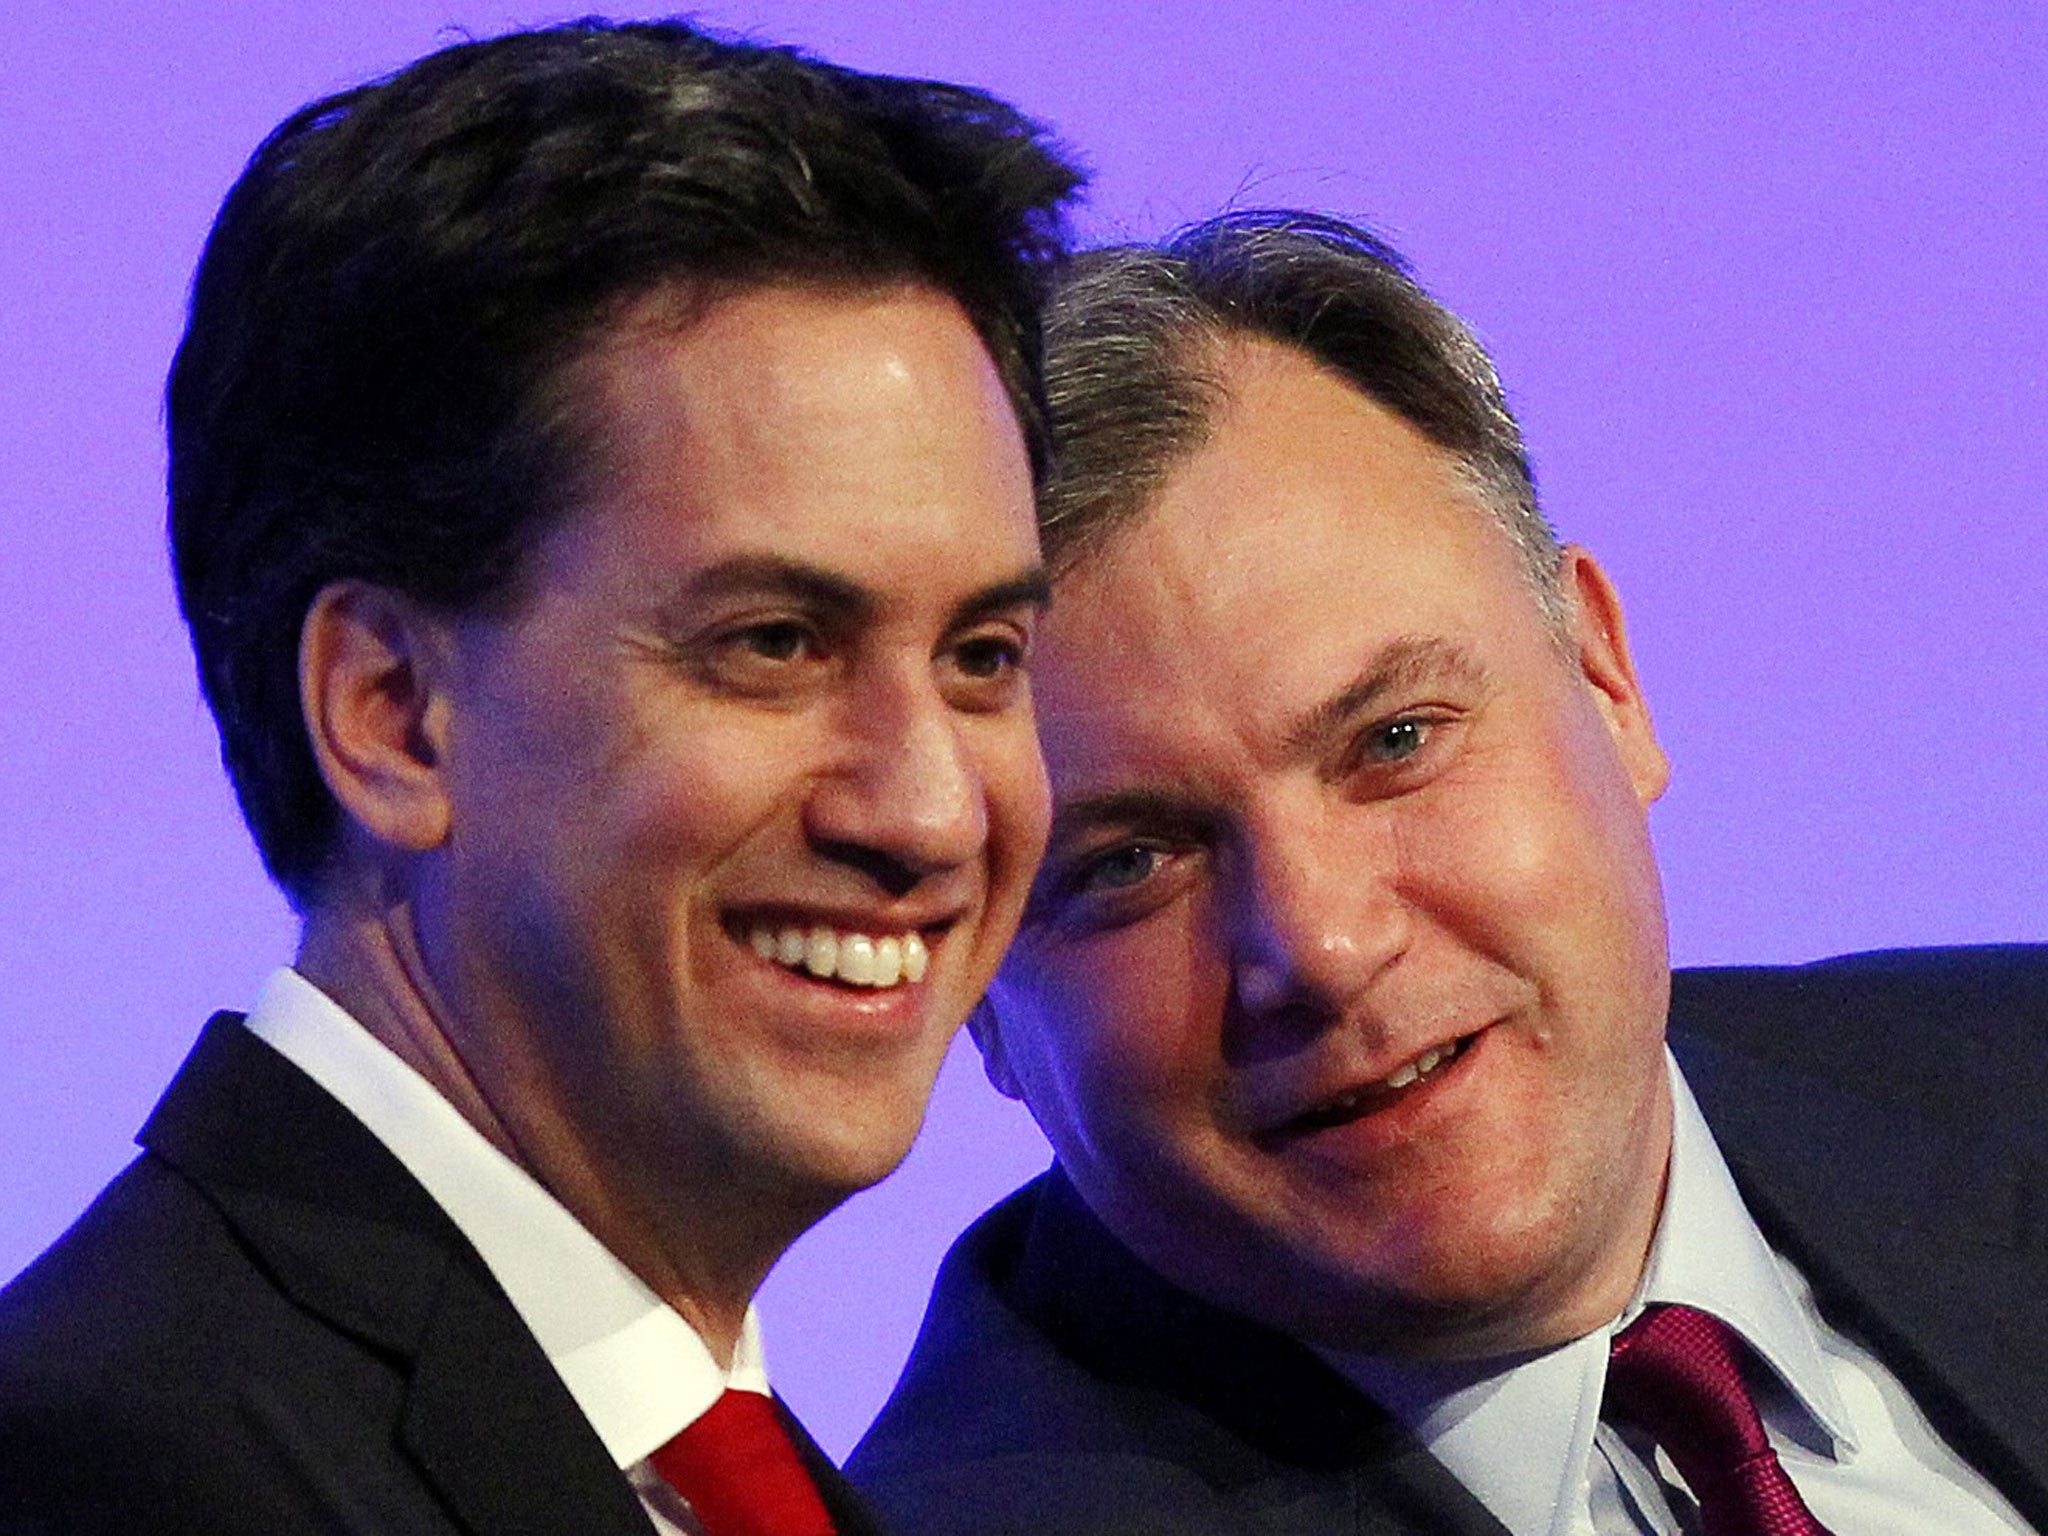 The Labour grassroots are unhappy with a new fiscal conservatism among the party leadership